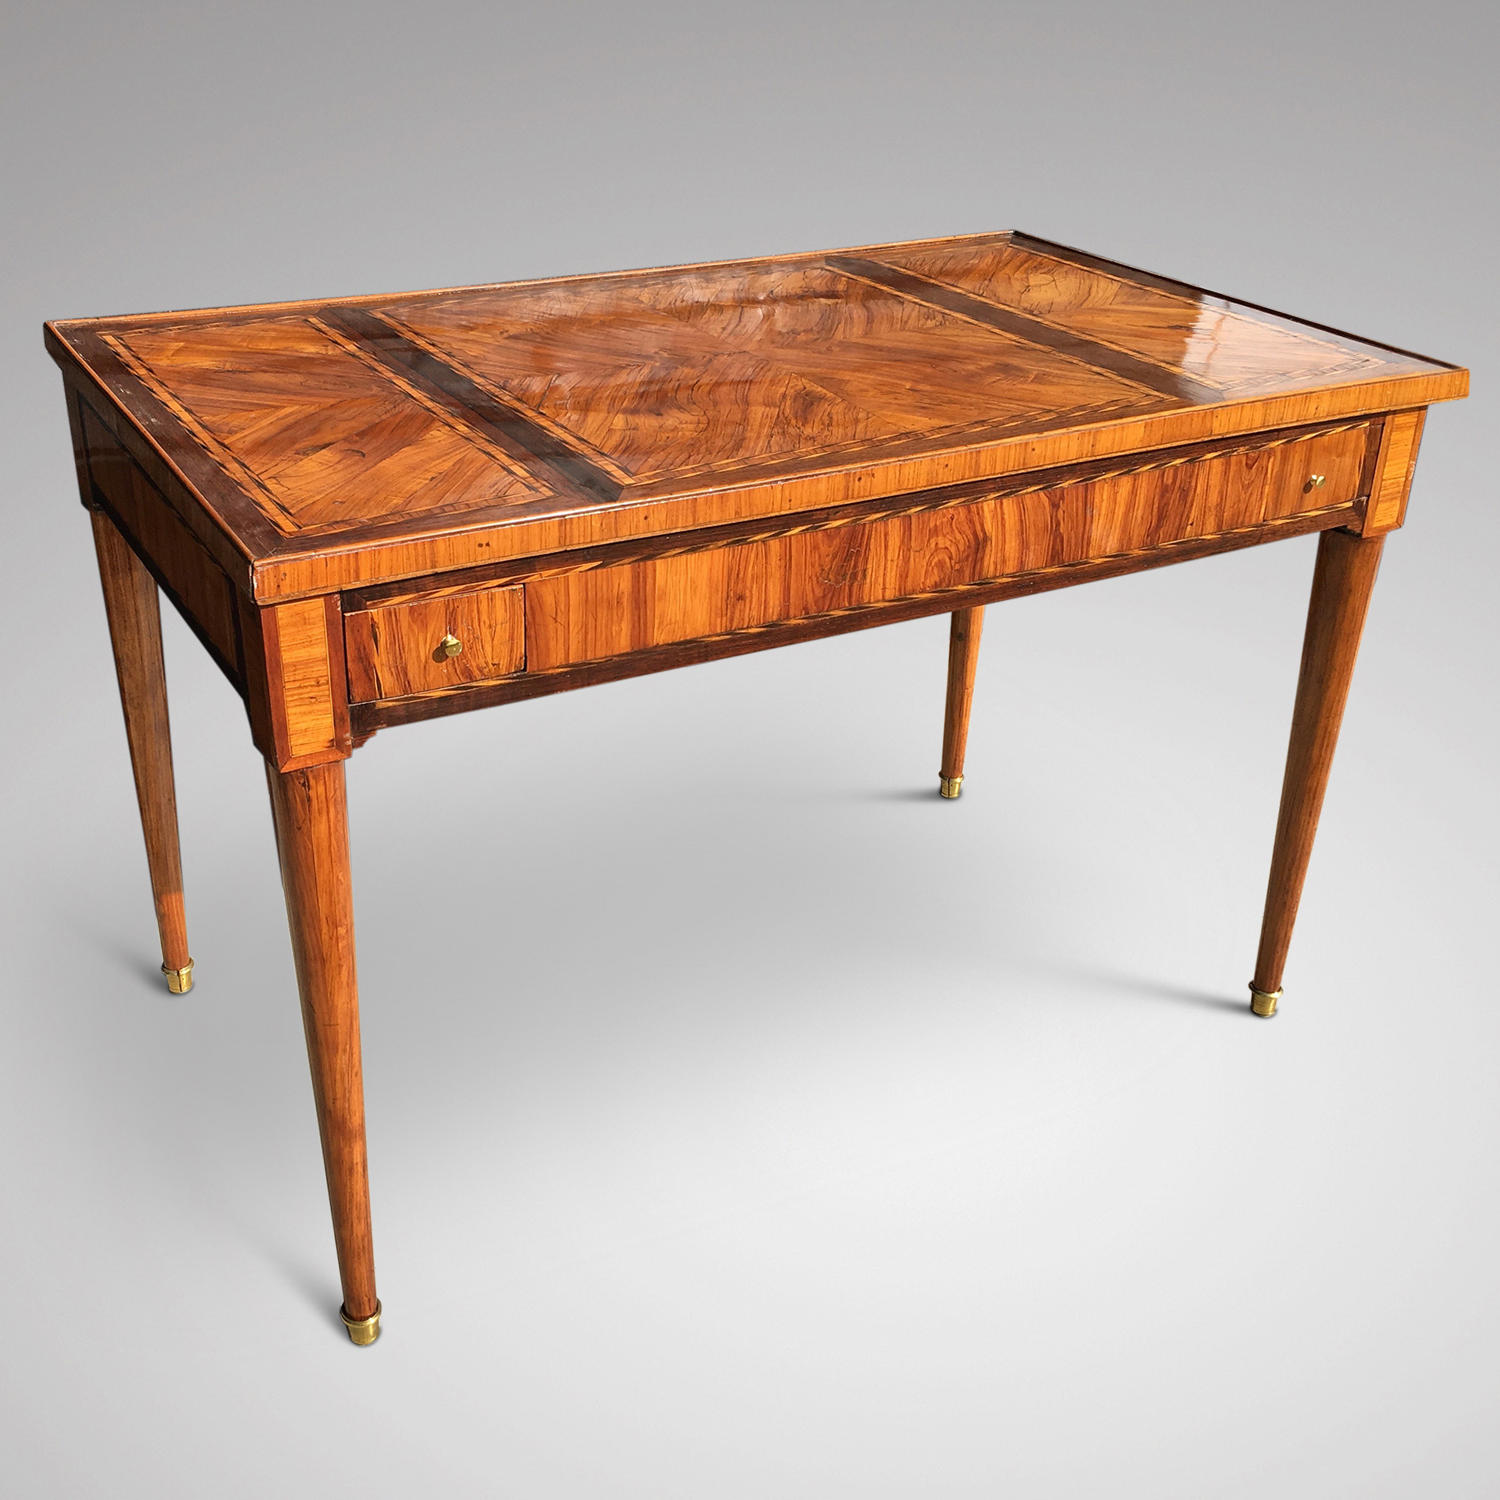 A LOUIS XVI PERIOD PARQUETRY TRIC/TRACTABLE